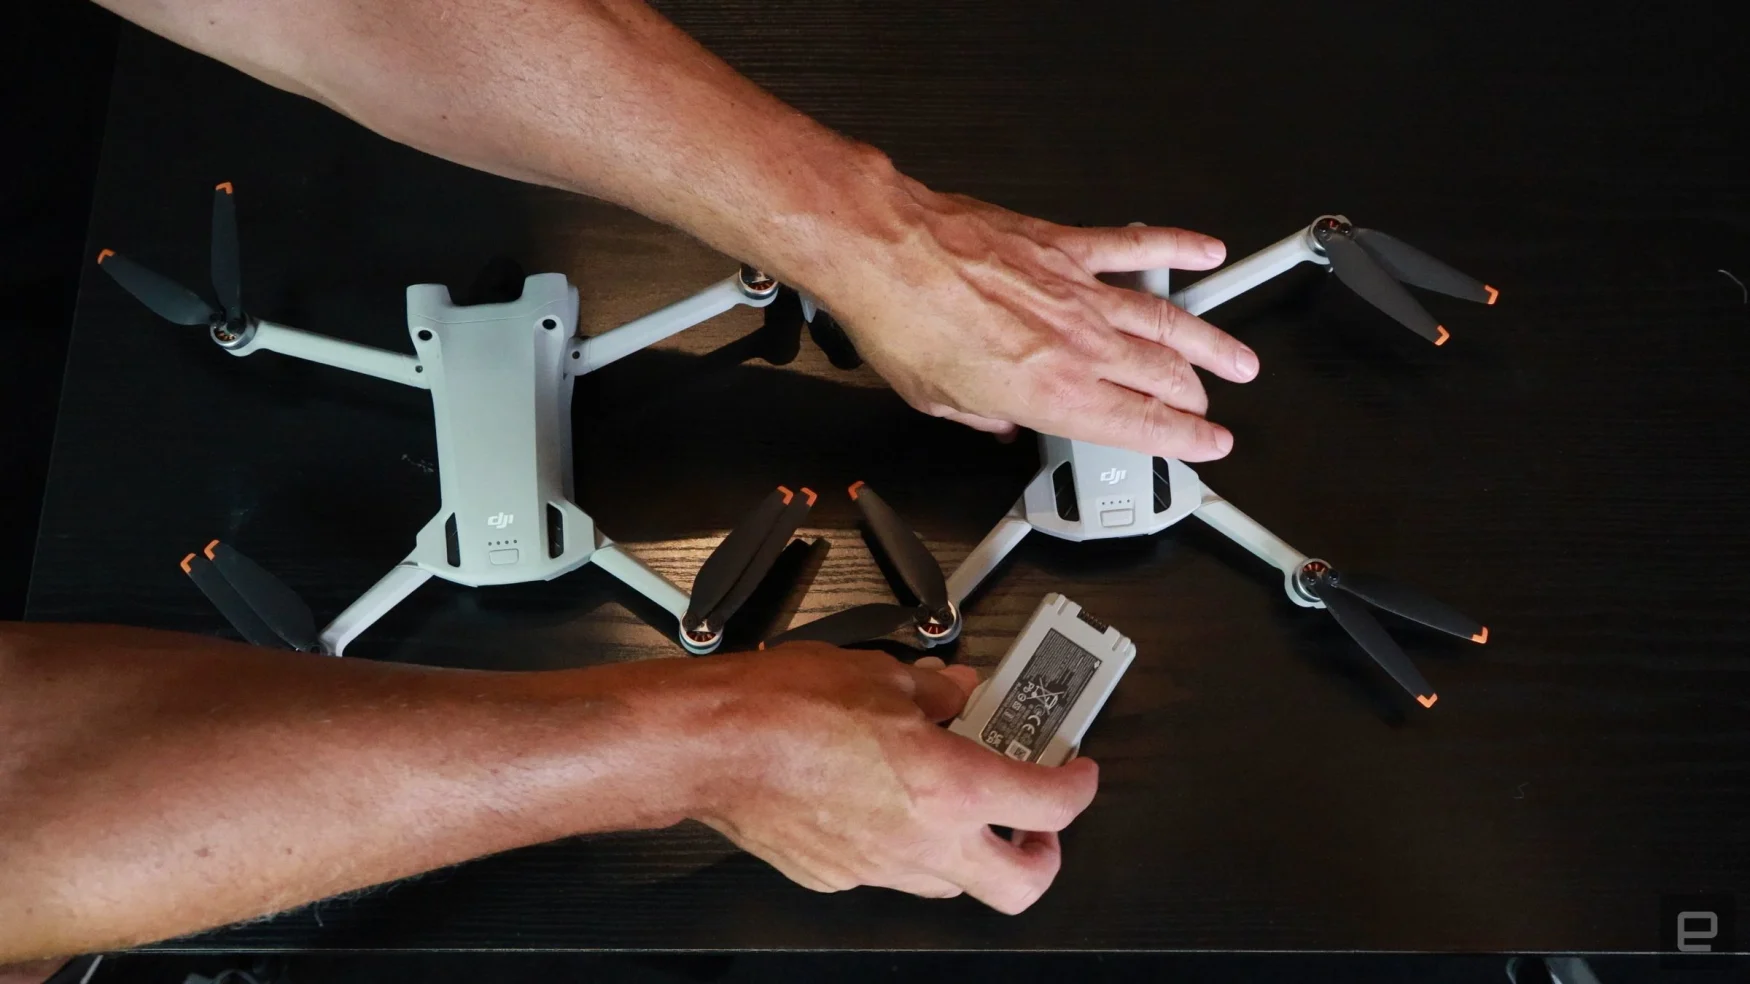 DJI Mini 4 Pro review: The best lightweight drone gets more power and smarts